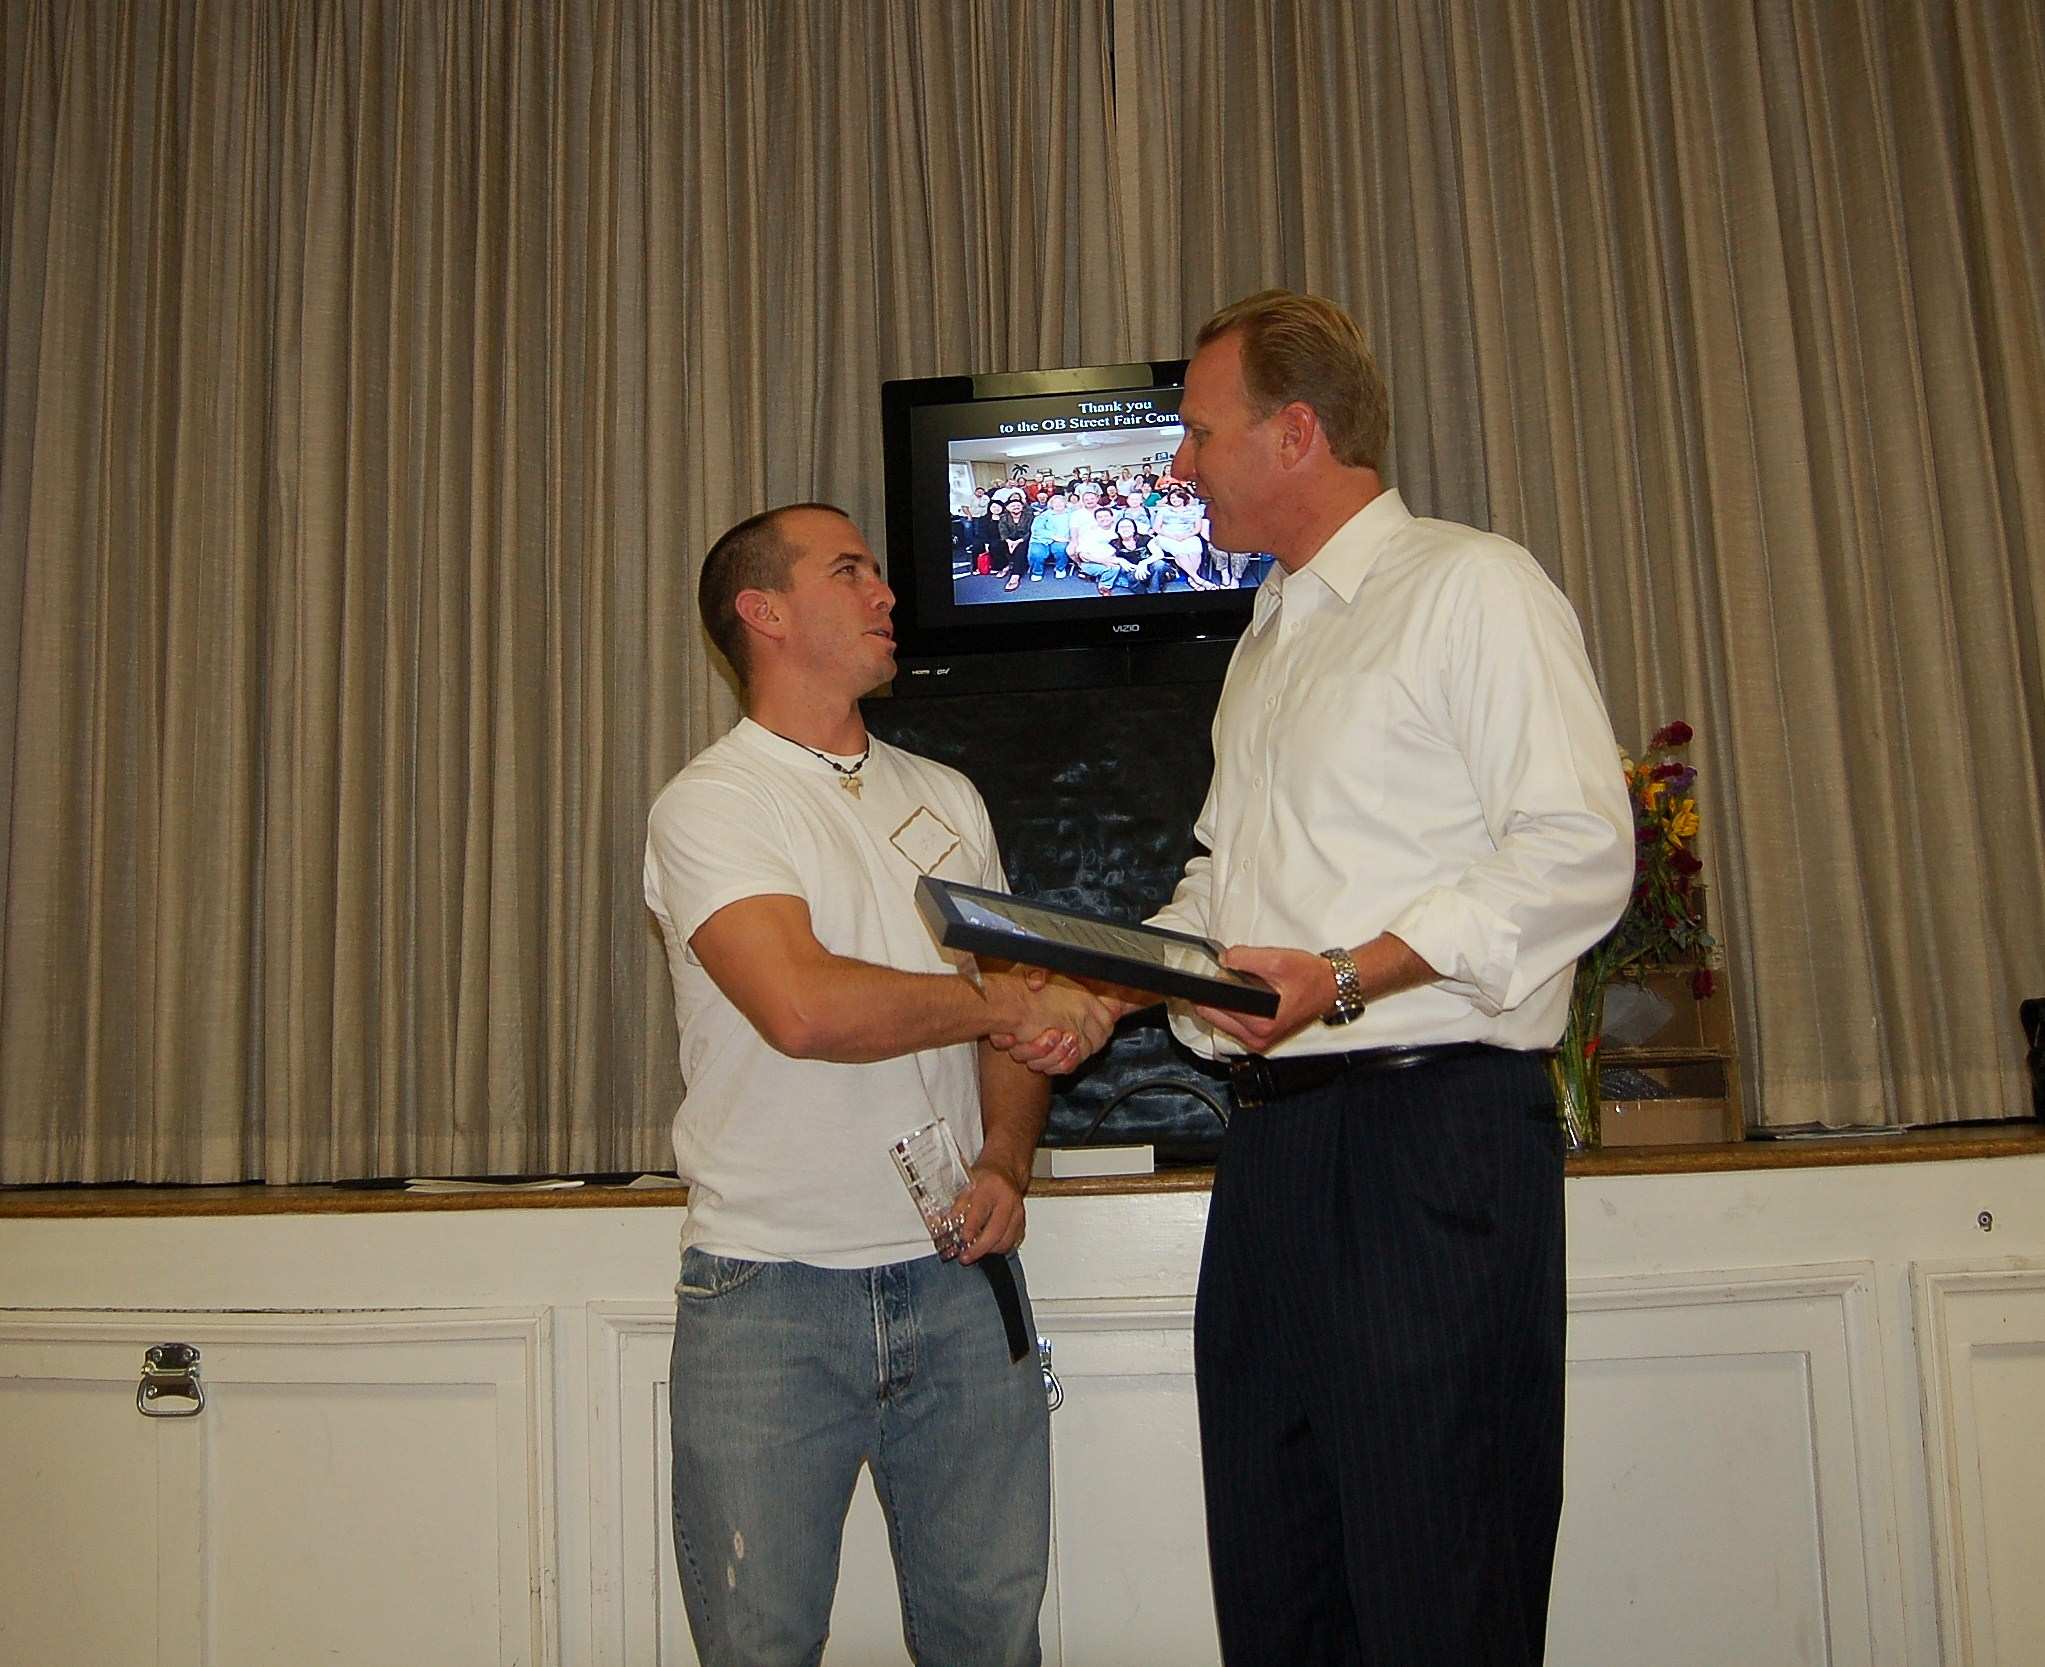 Intrepid Network, President & CEO, Josh Utley receives award from california district 52 representative Kevin Faulconer